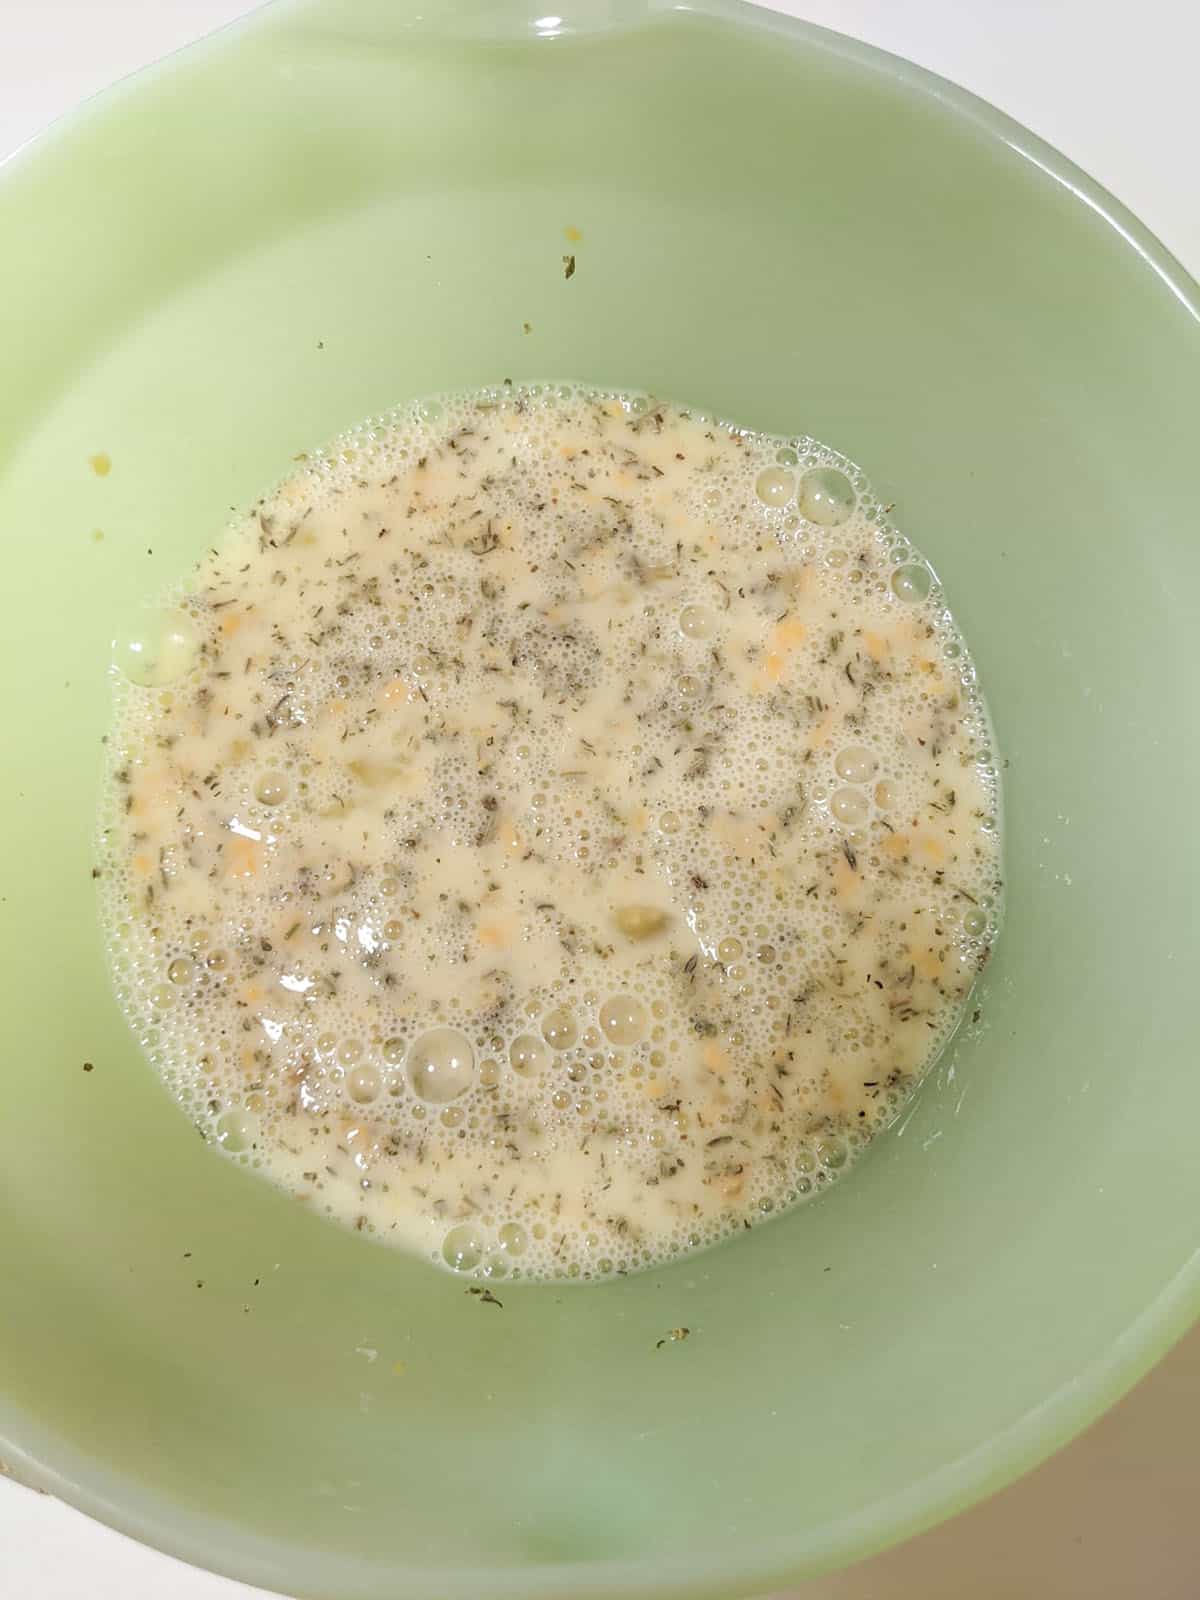 The egg mixture with the seasonings mixed in, in a green bowl. 